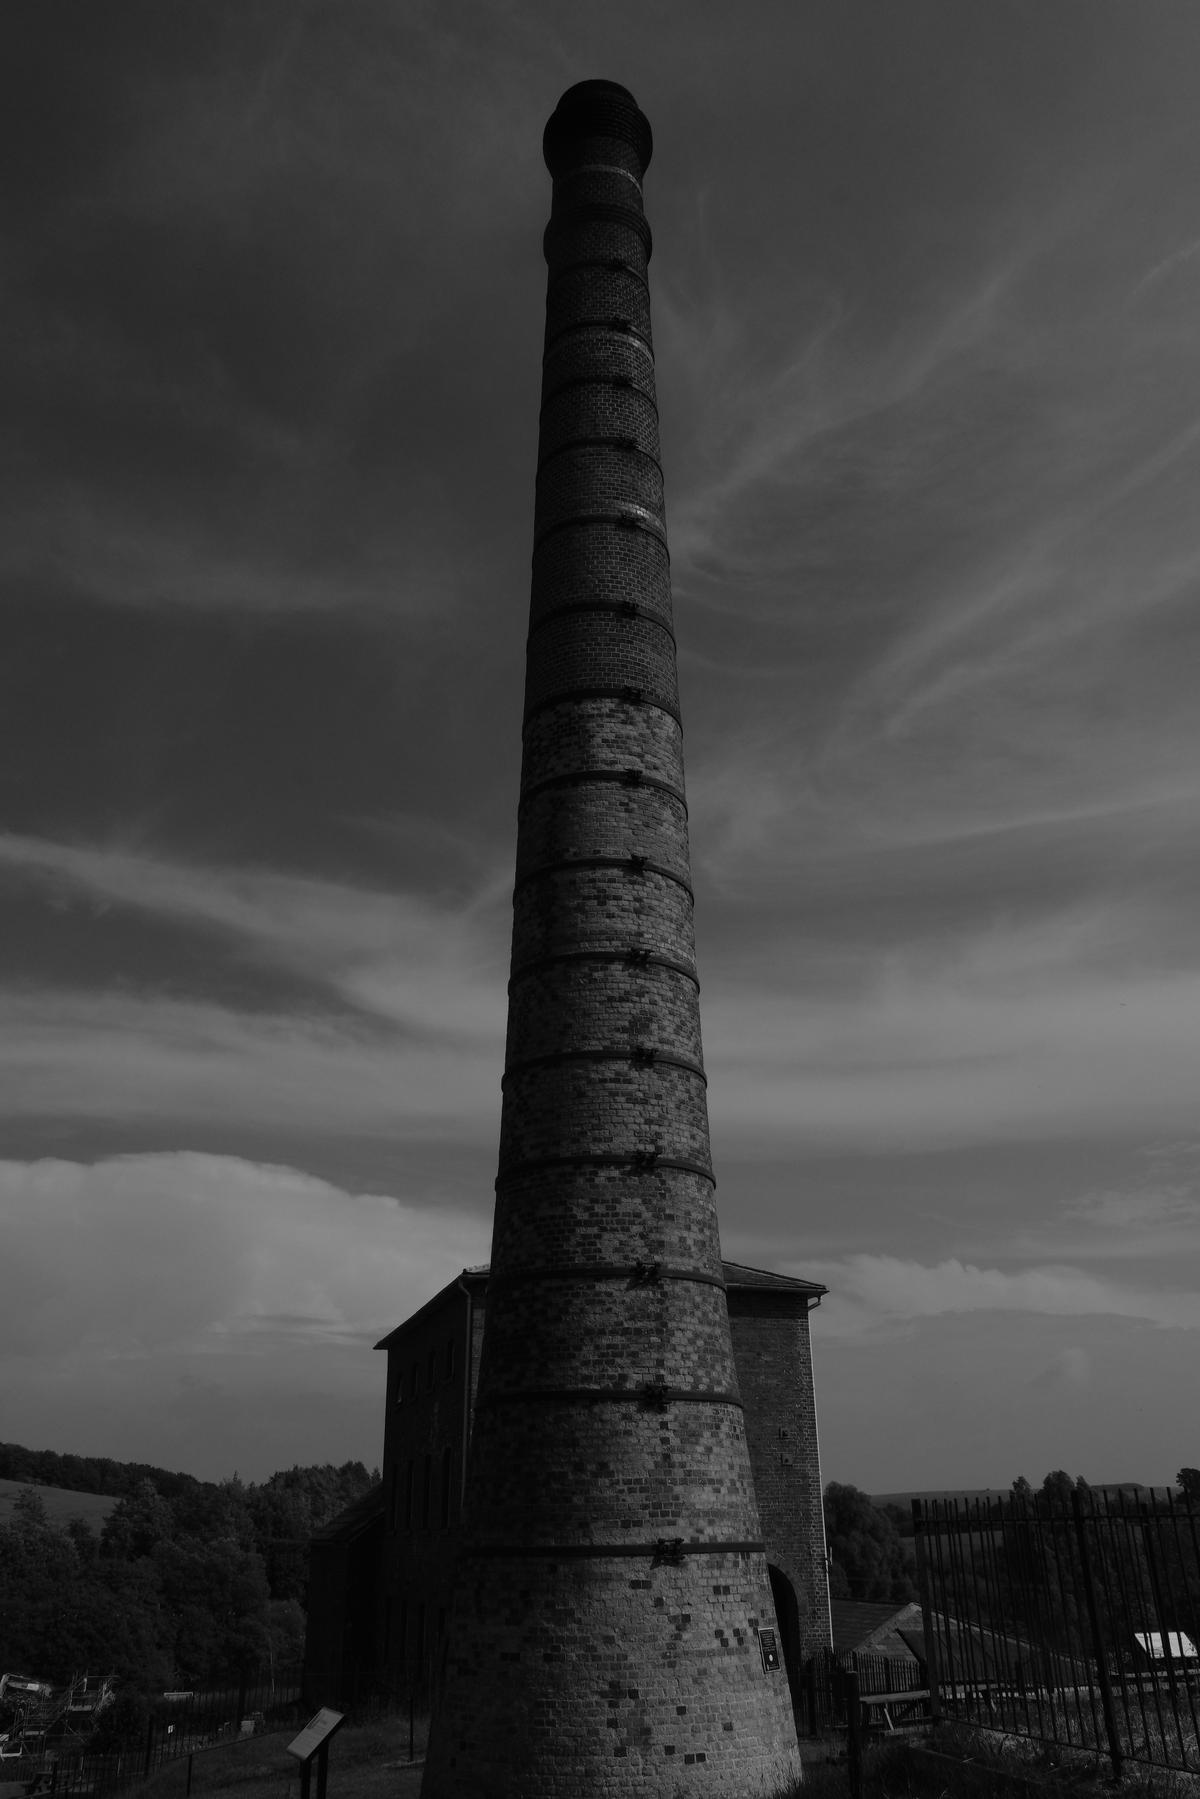 A smoke stack stands abandoned in the middle of the country side